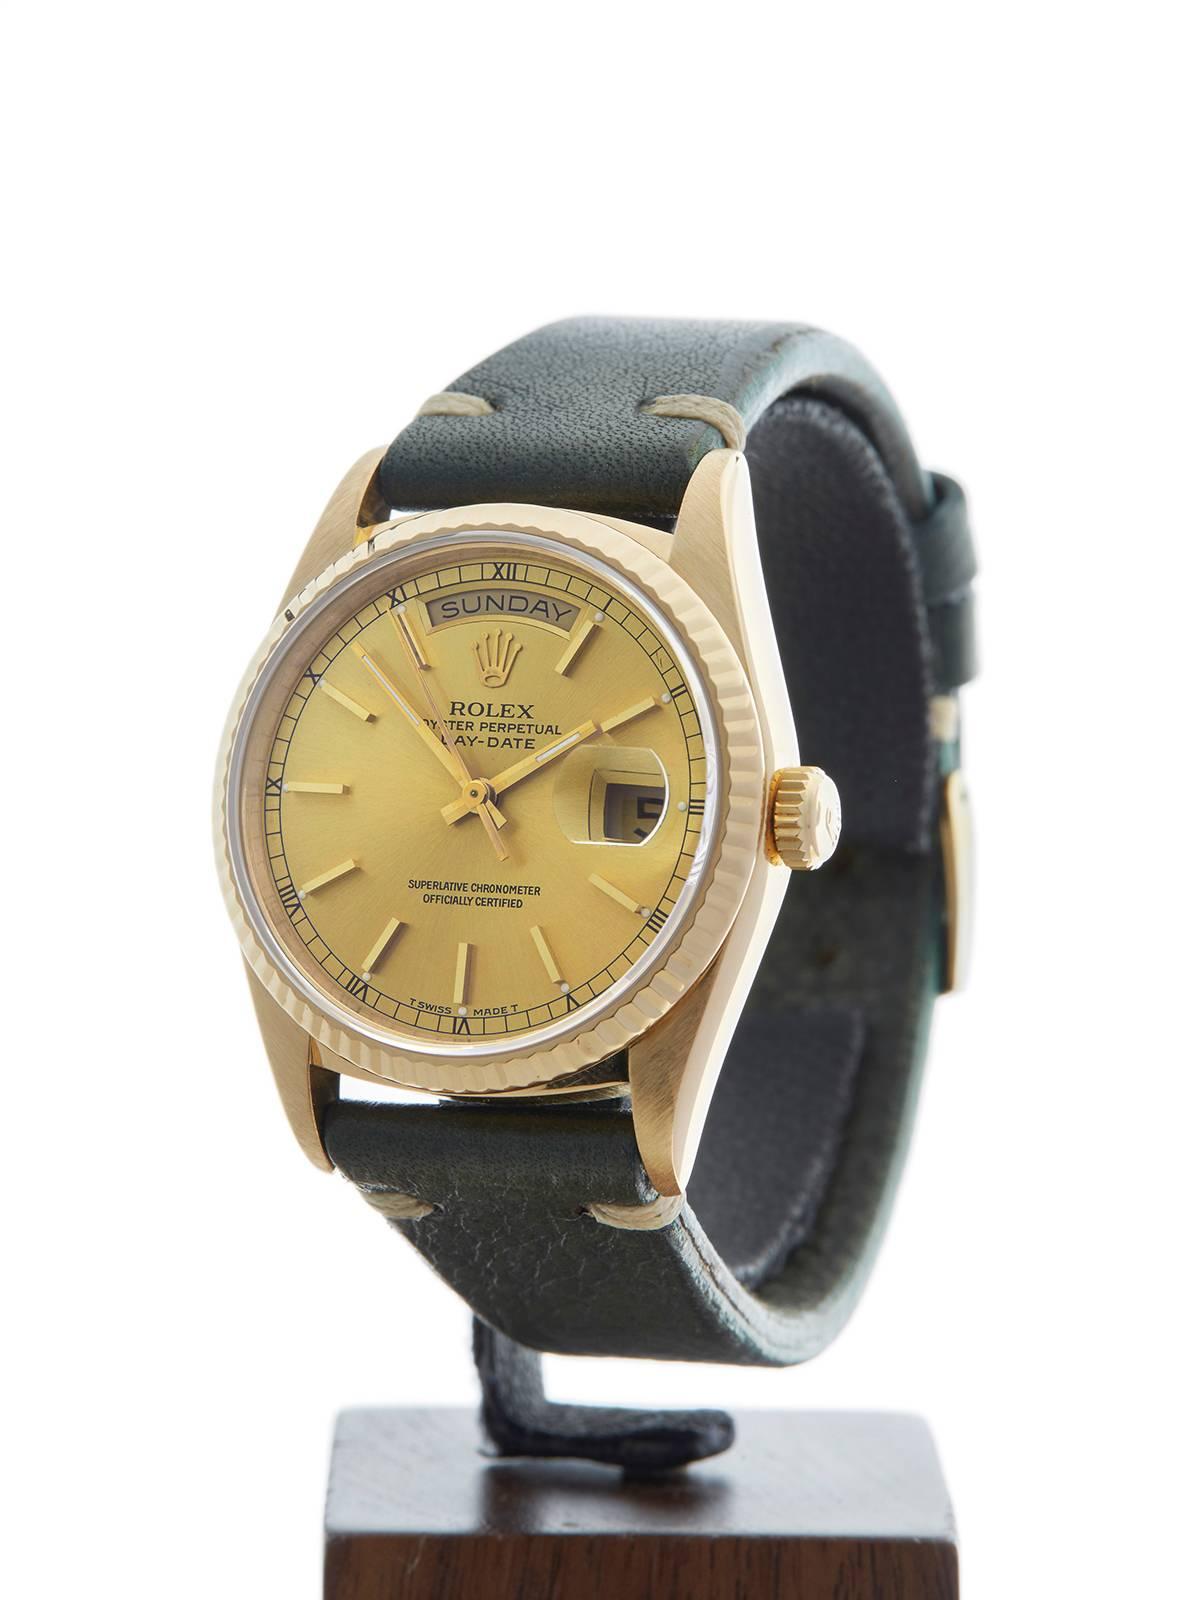 Ref: W3552
Model: 18238
Serial: L24****
Condition: 9 - Excellent condition
Age: 1989
Case Diameter: 36 mm
Case Size: 36mm
Box and Papers: Box Only
Movement: Automatic
Case: 18k Yellow Gold
Dial: Champagne Baton
Bracelet: Green Calf Leather
Strap